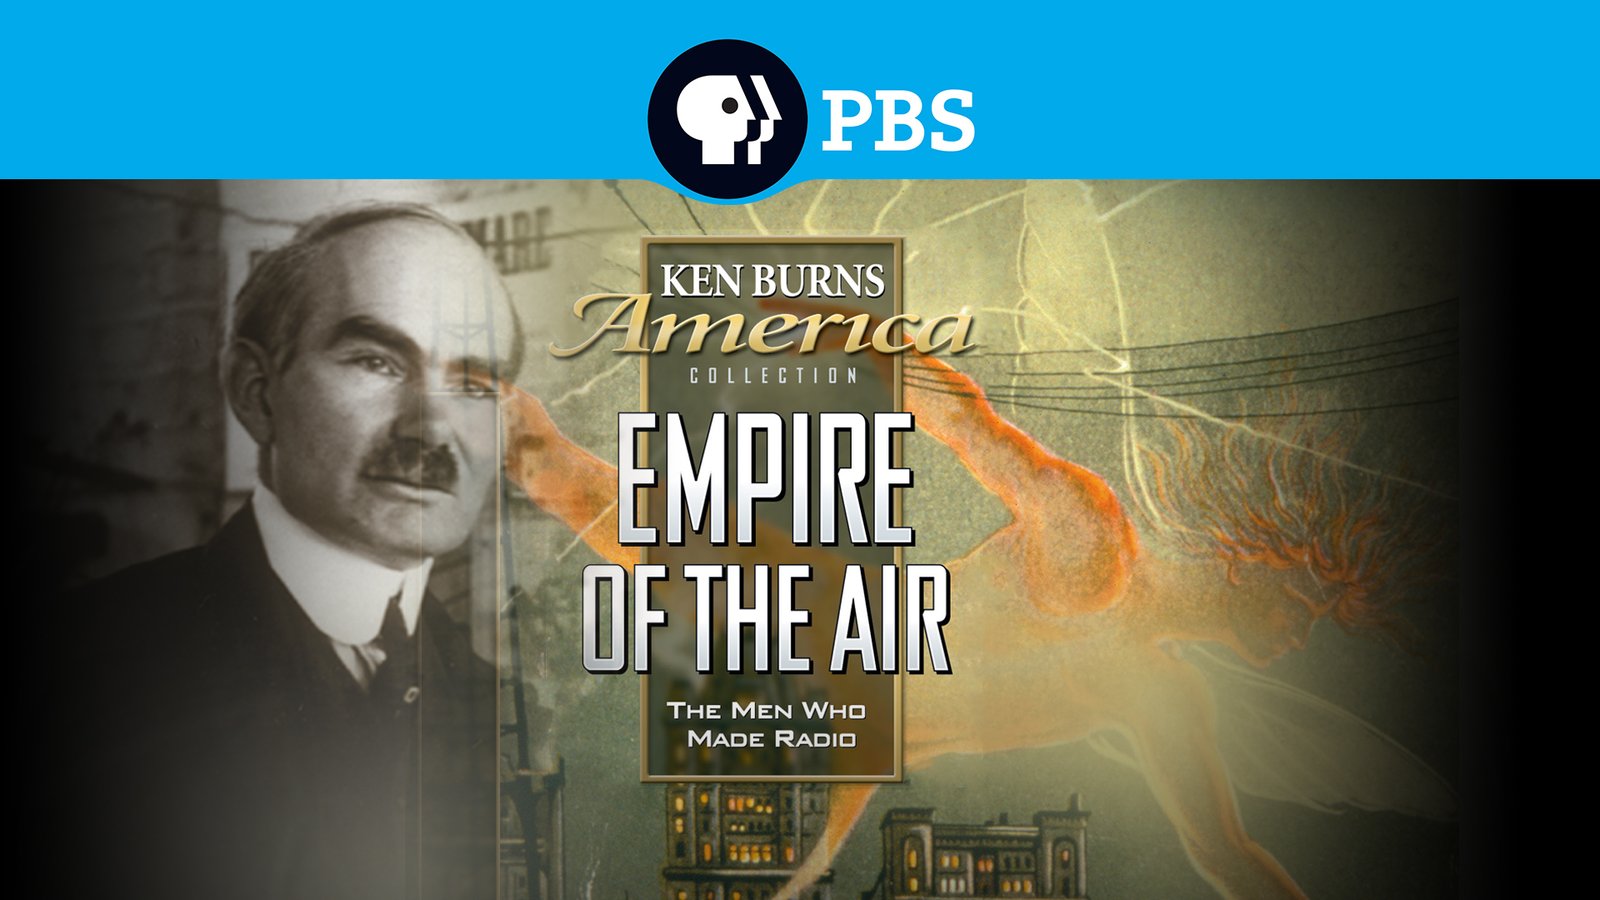 Ken Burns: Empire of the Air - The Men Who Made Radio